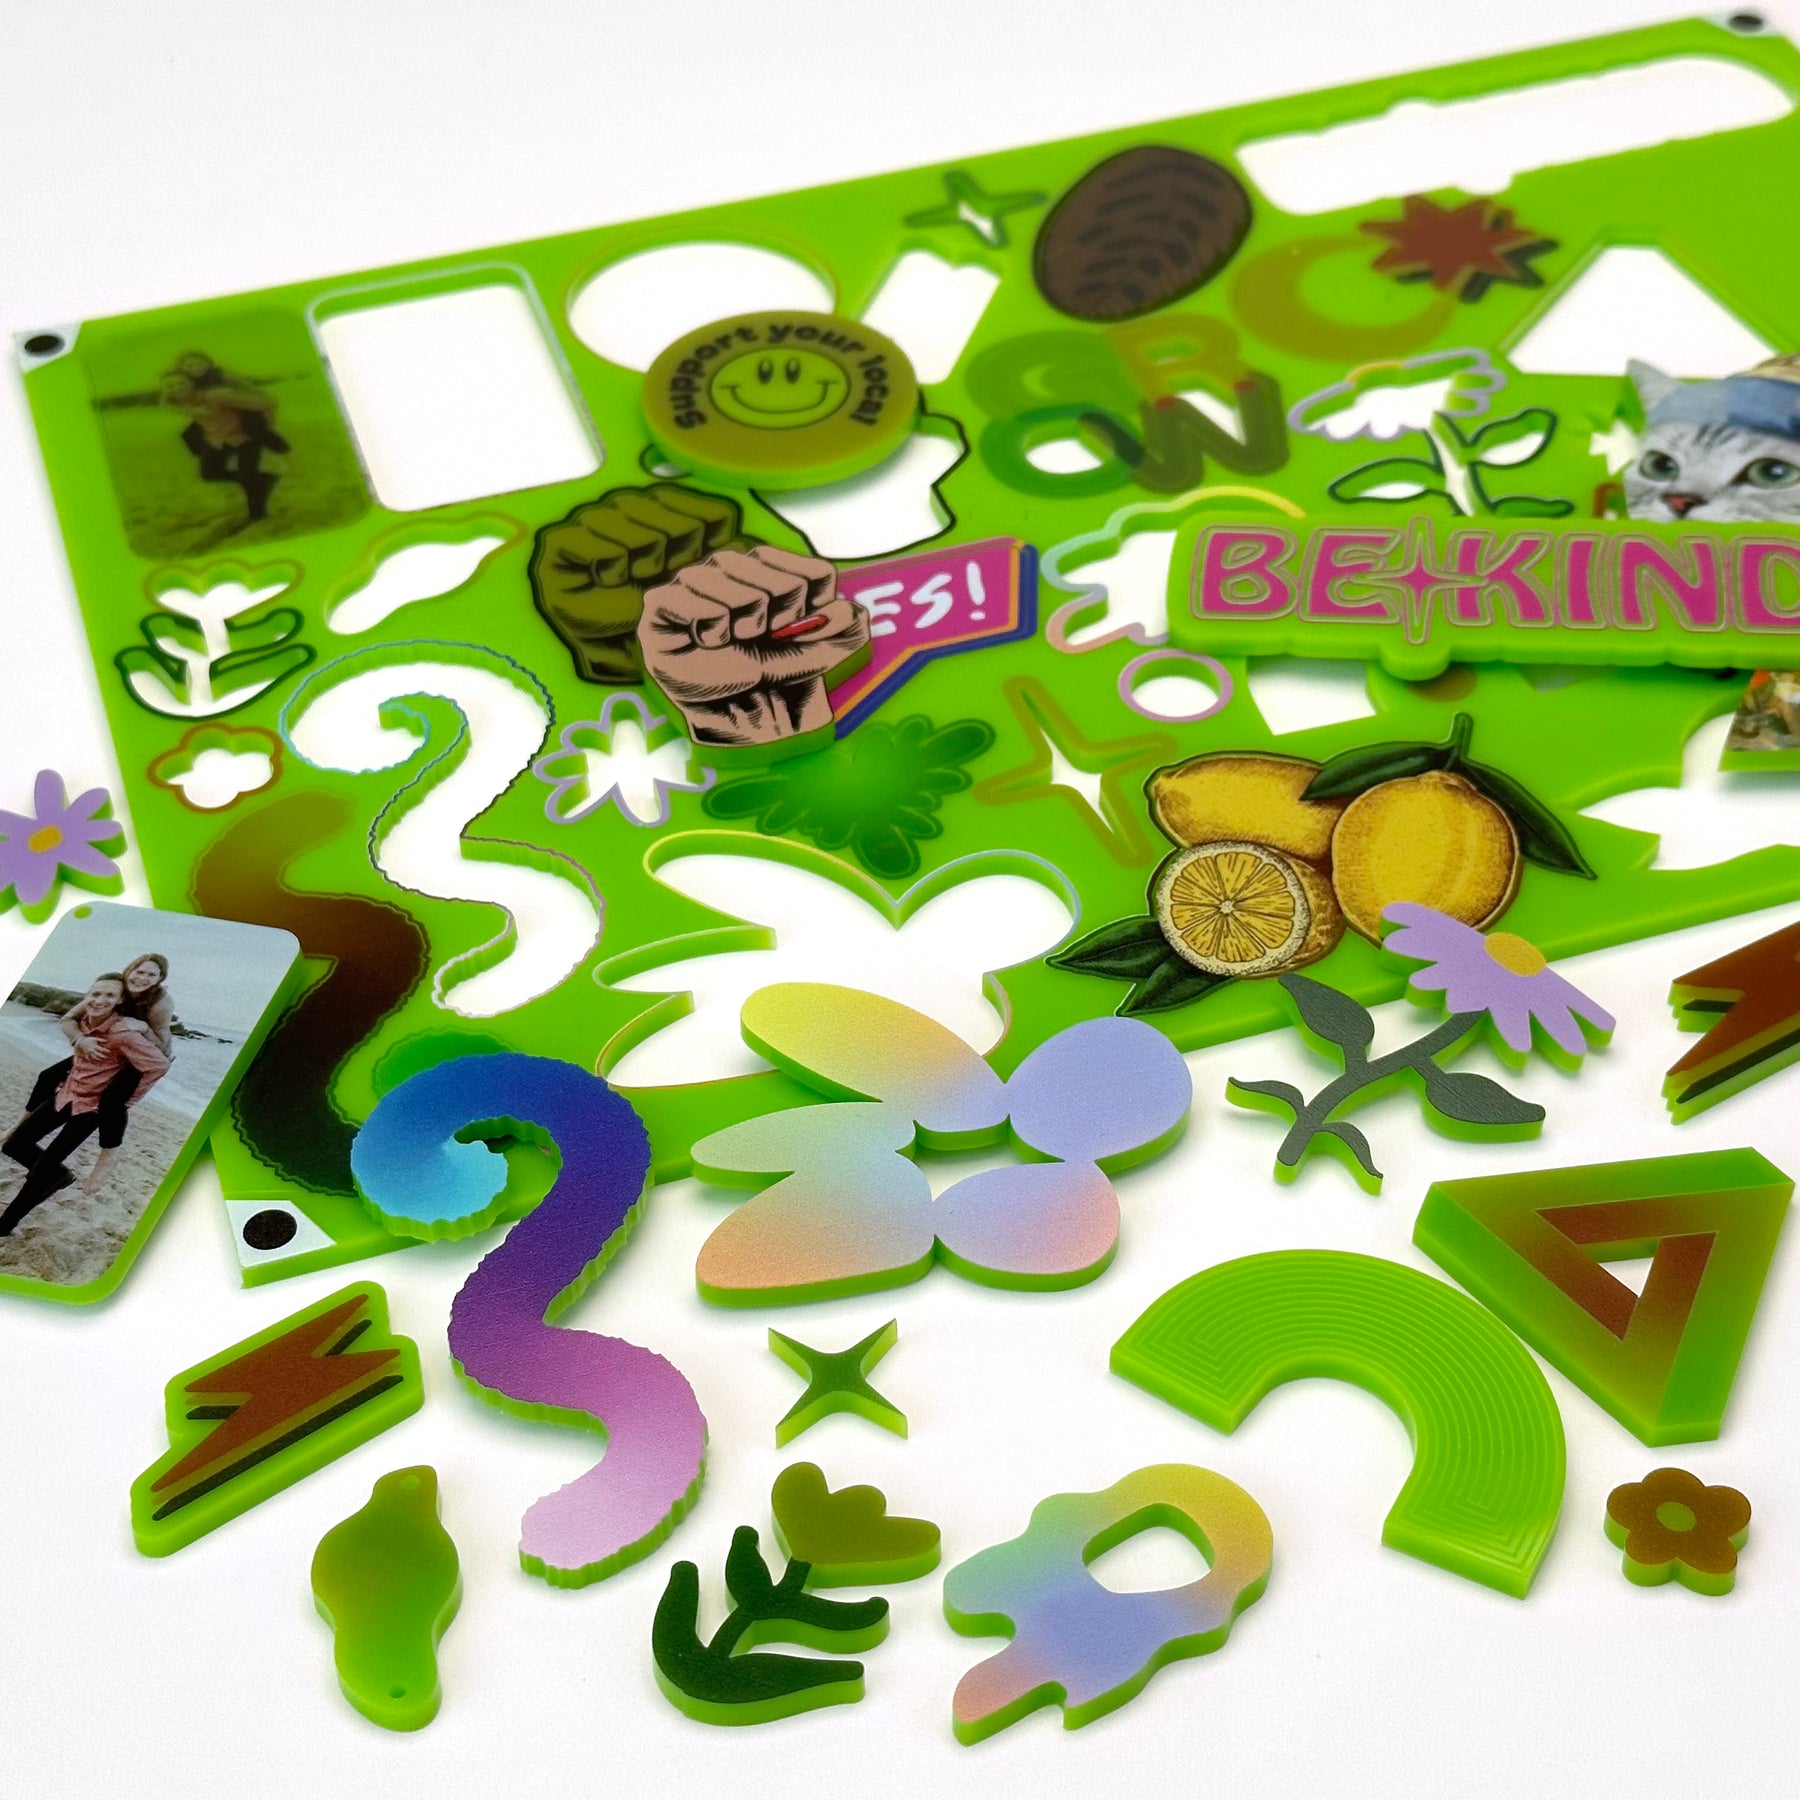 Lime green Acrylic with laser cutting & Printing - 600x400mm